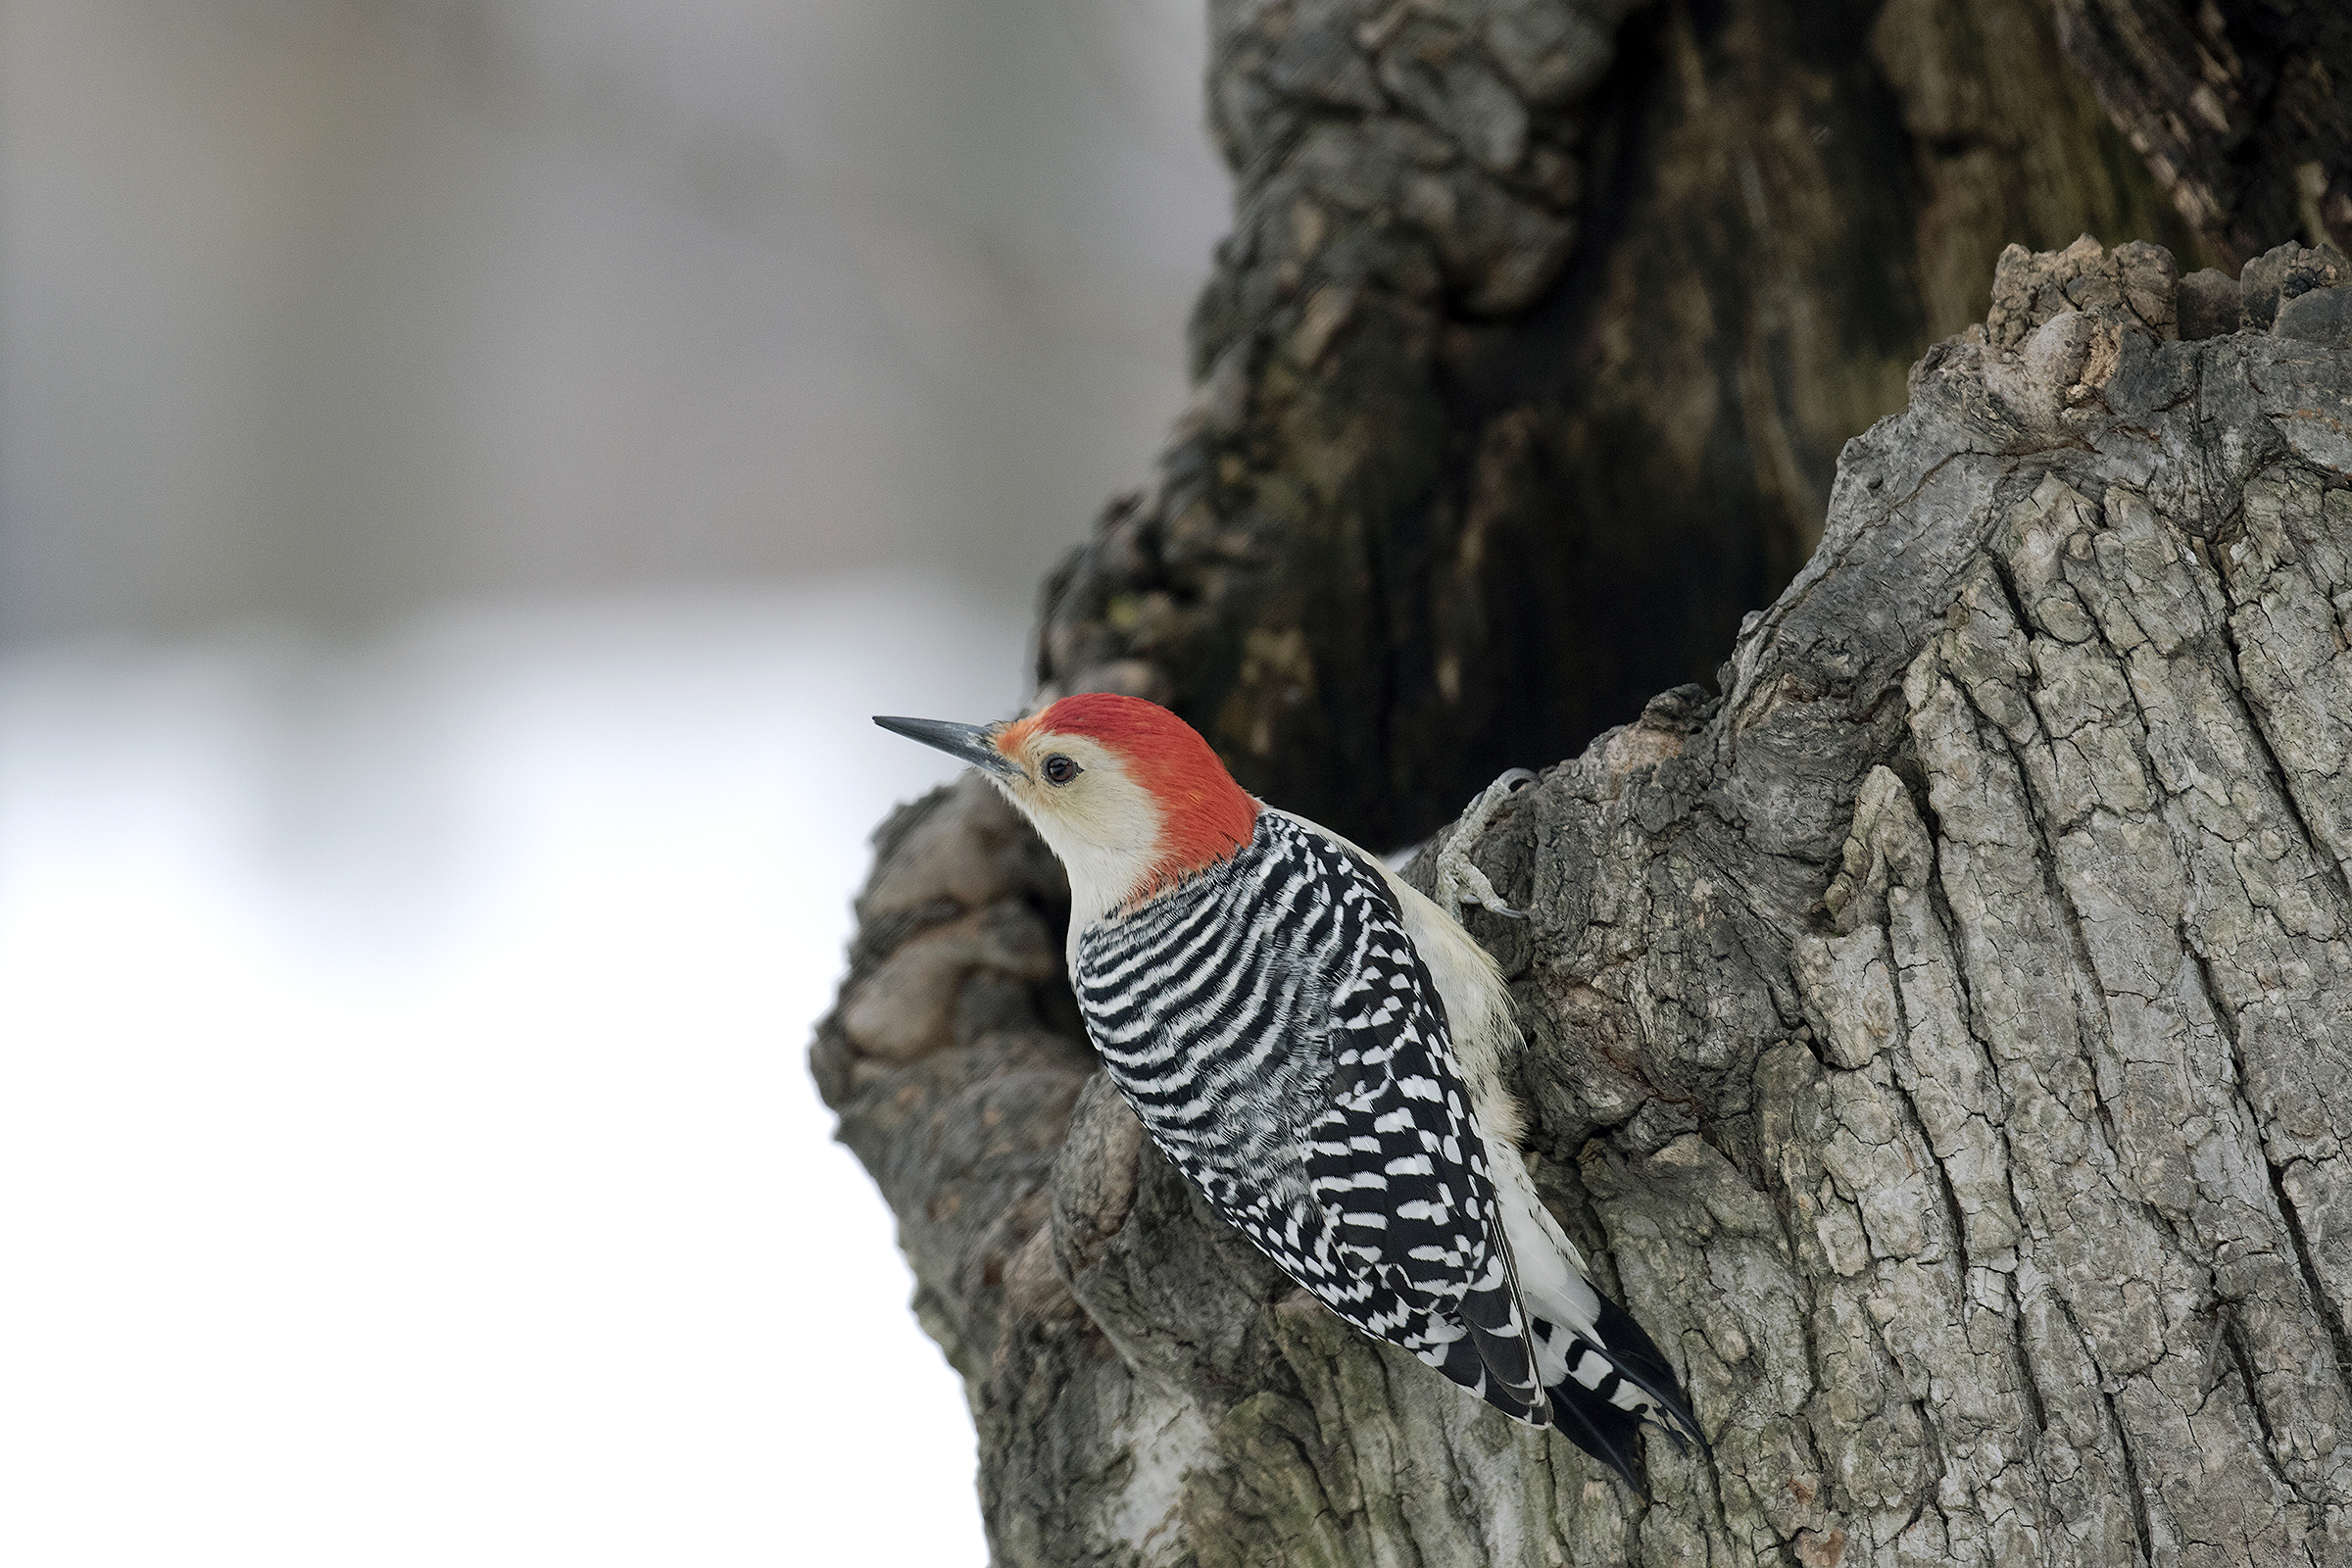  The striking Red-bellied Woodpecker (here a male, distinguishable by his all-red cap) can be found year-round in Crotona Park. Photo: Matthew Pimm/Audubon Photography Awards